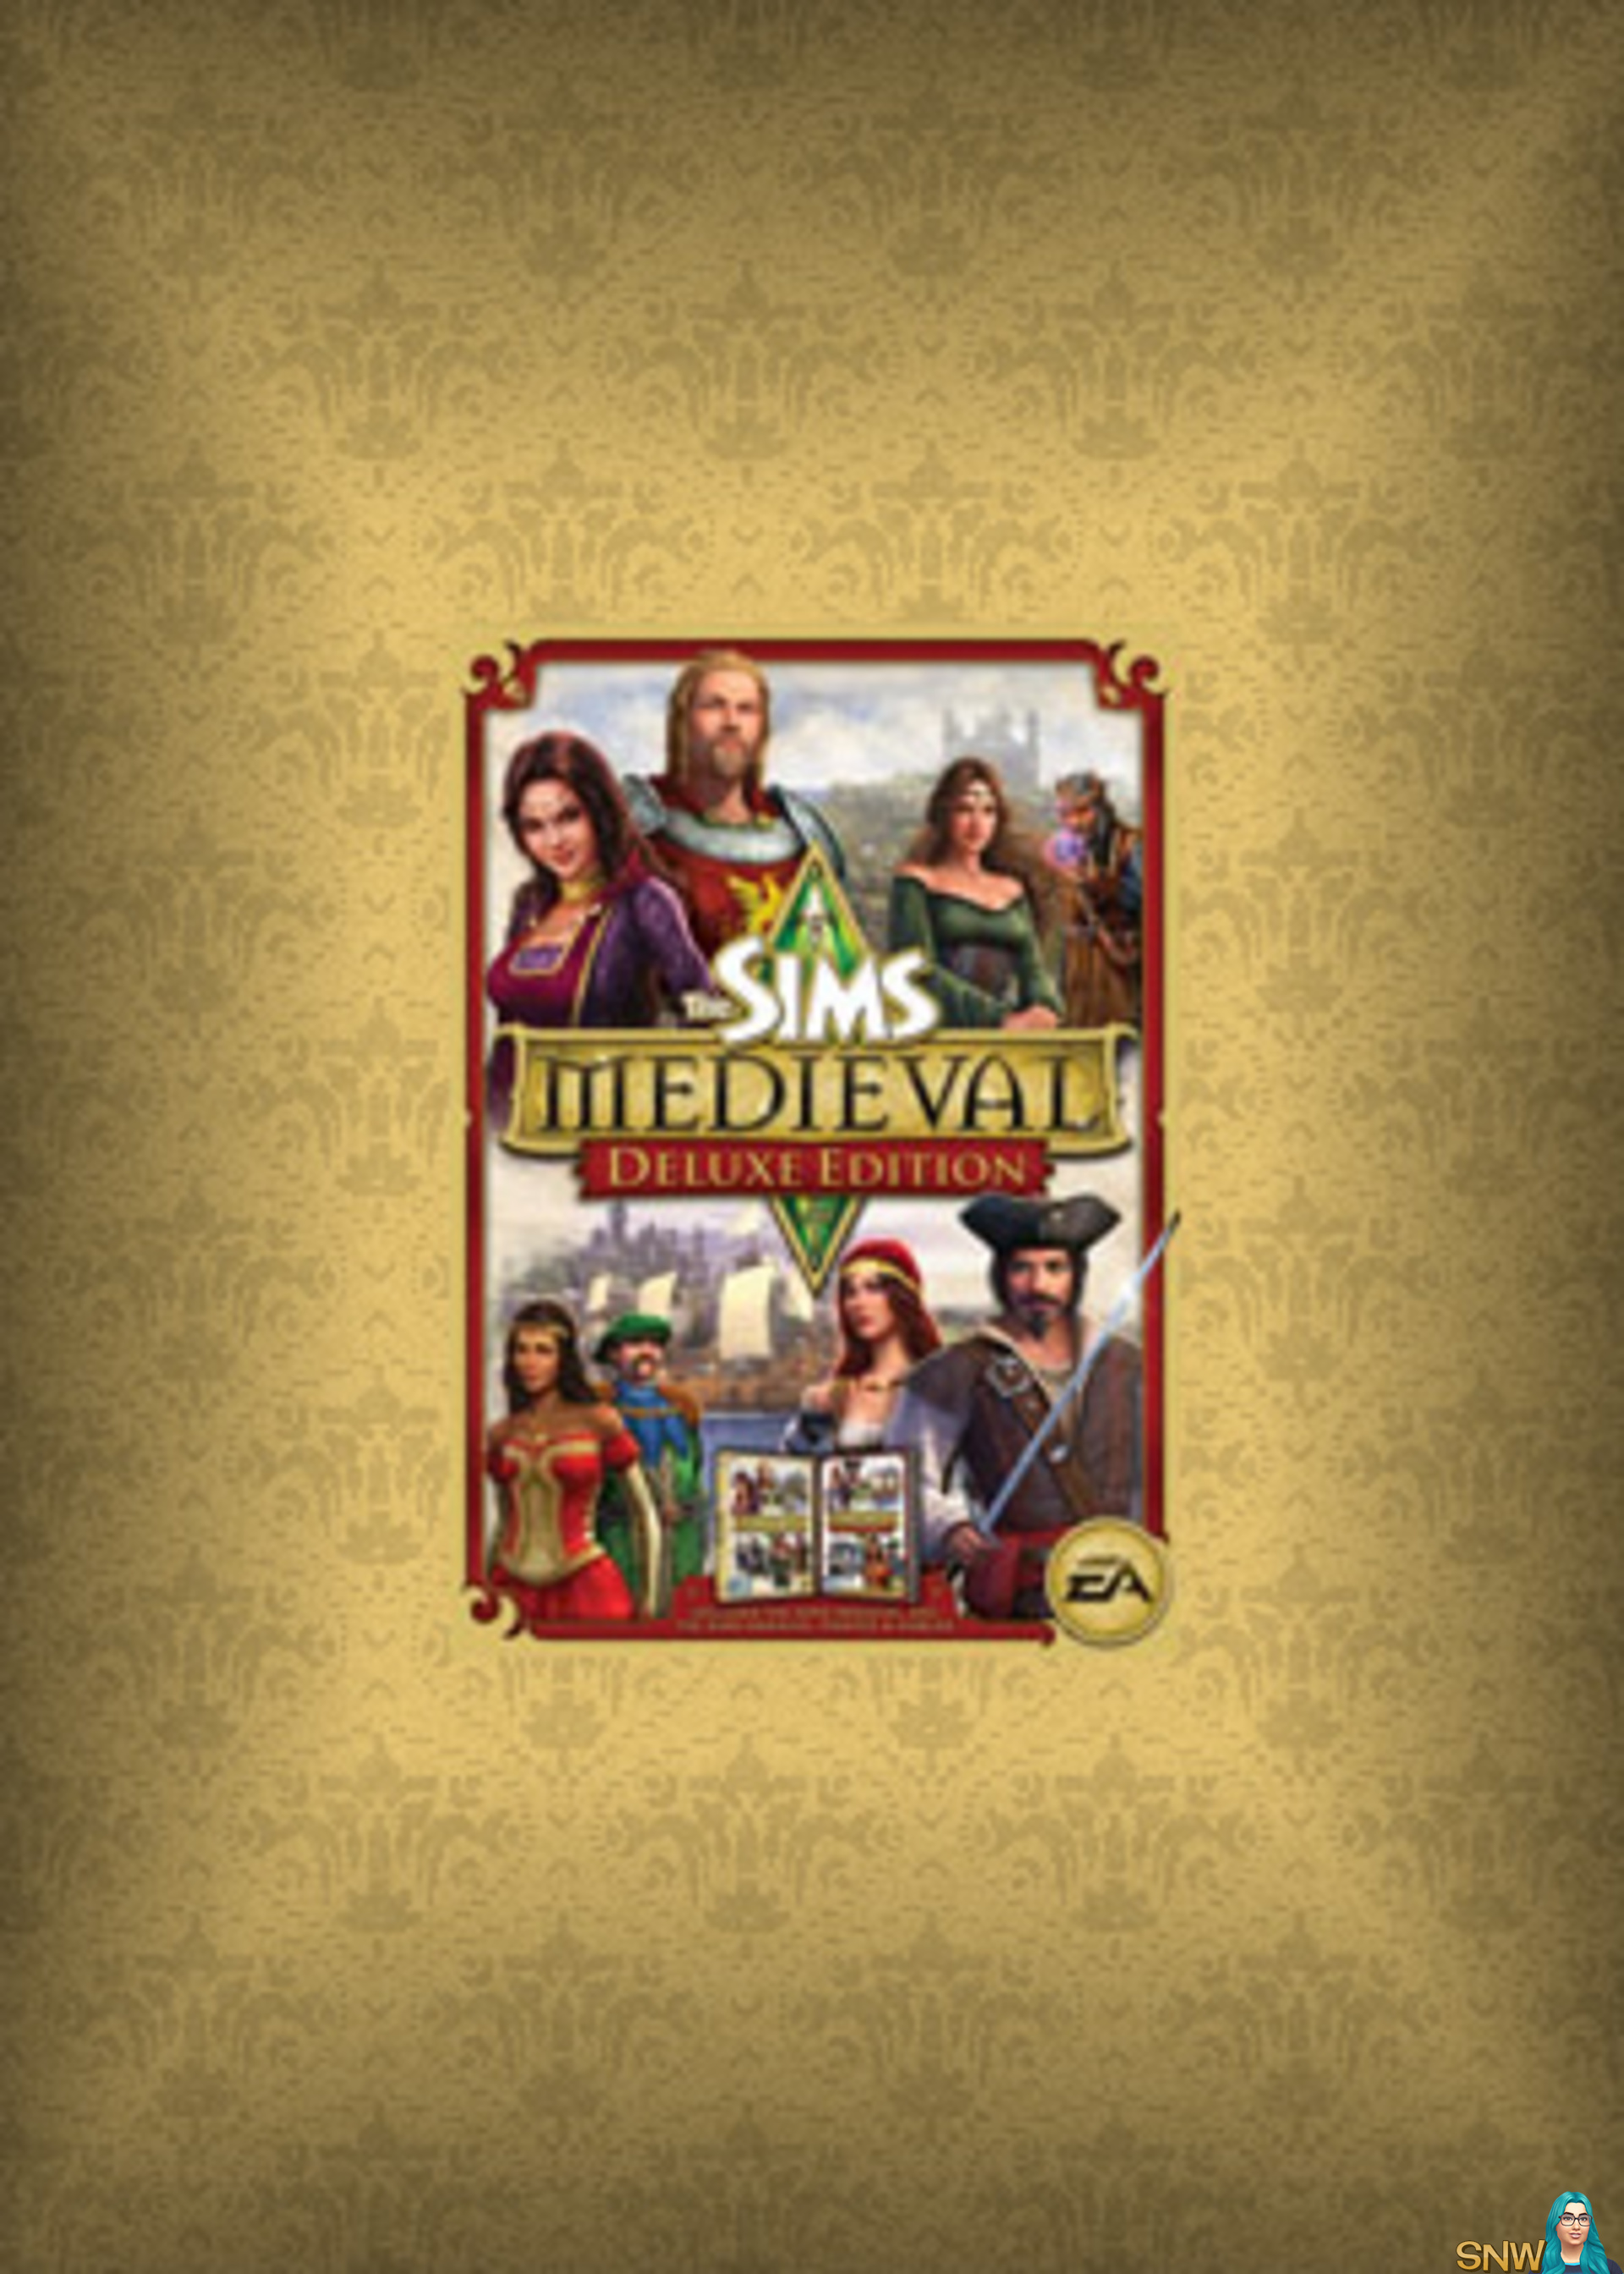 the sims medieval deluxe edition download